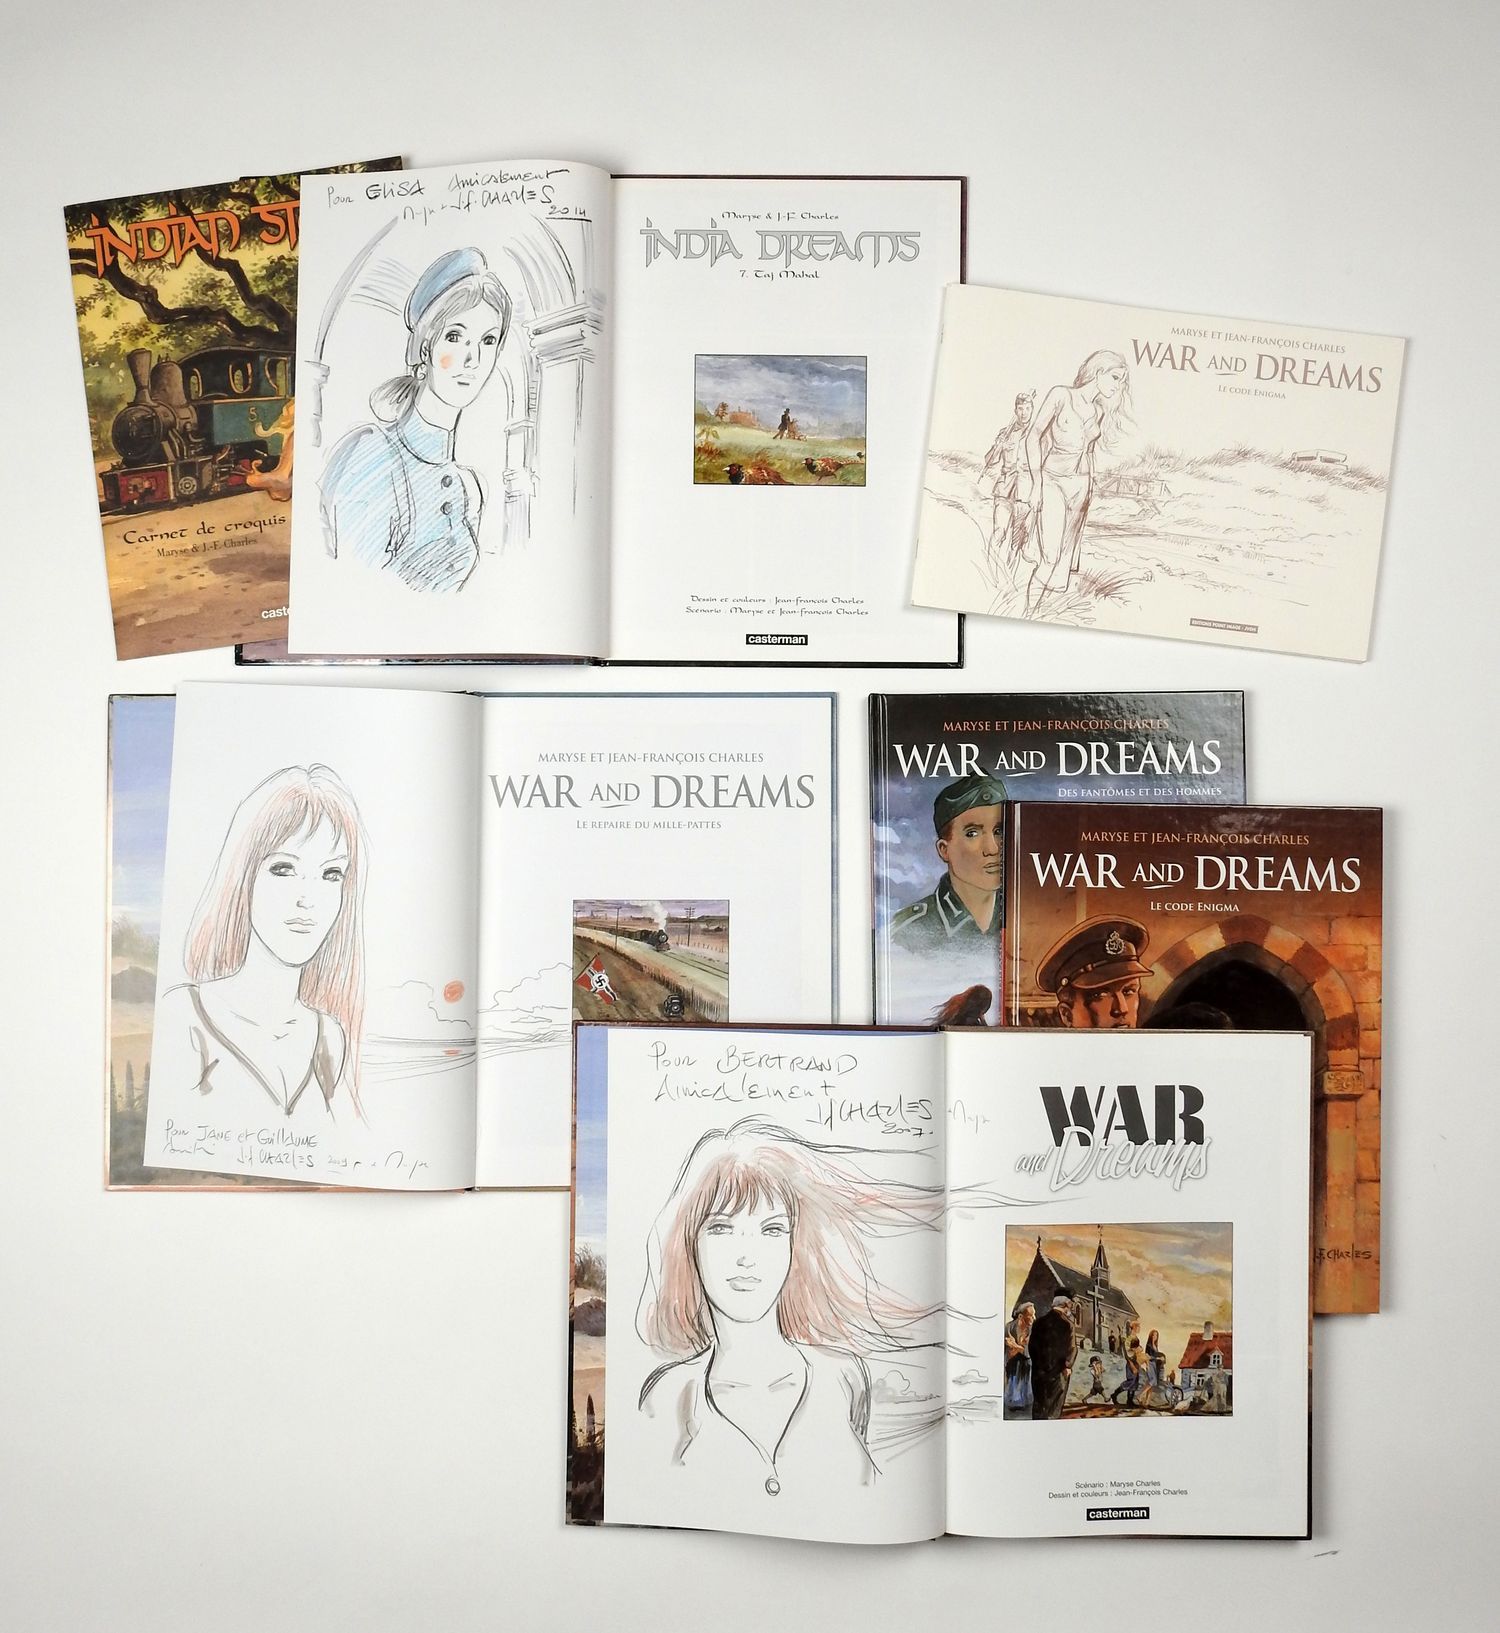 Null CHARLES Jean François

War and Dreams

Box set including volumes 1 to 4 in &hellip;